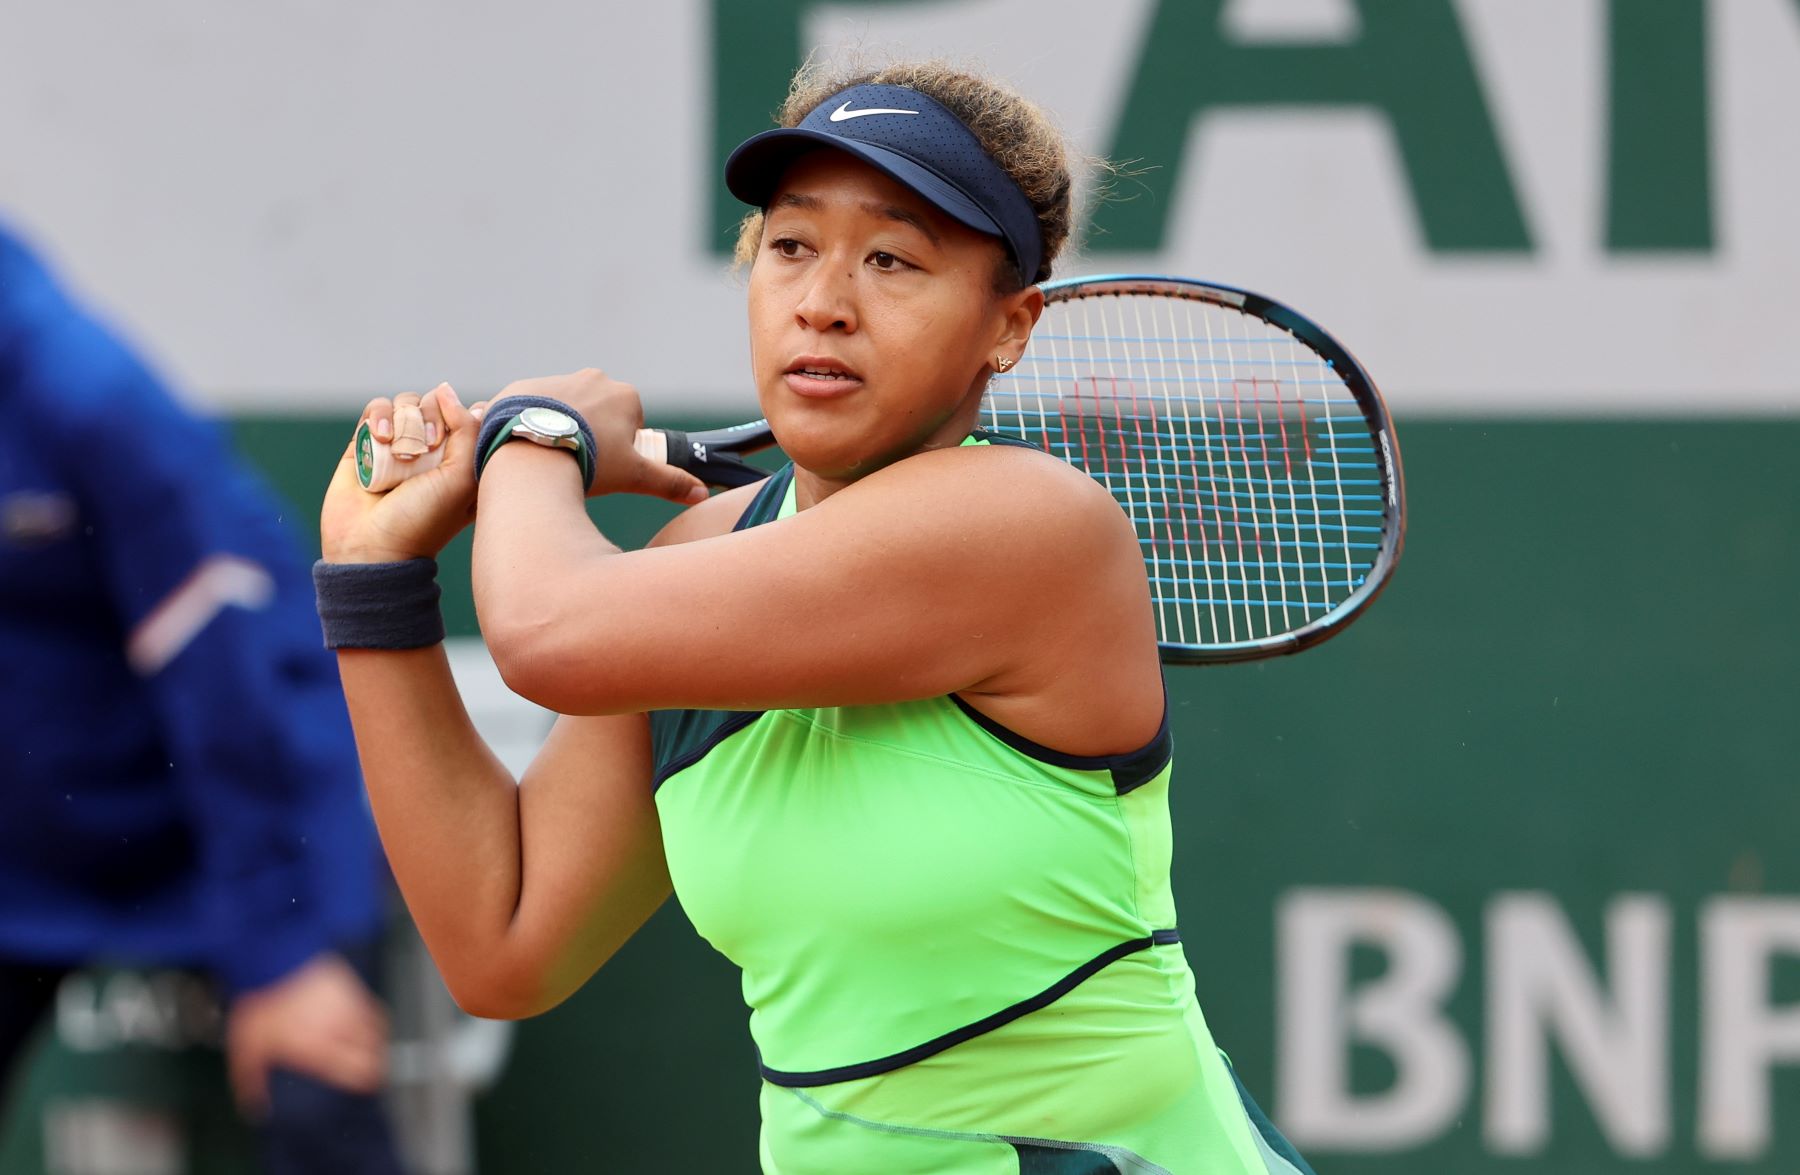 Naomi Osaka of Japan during Day 2 of the French Open 2022 in Paris